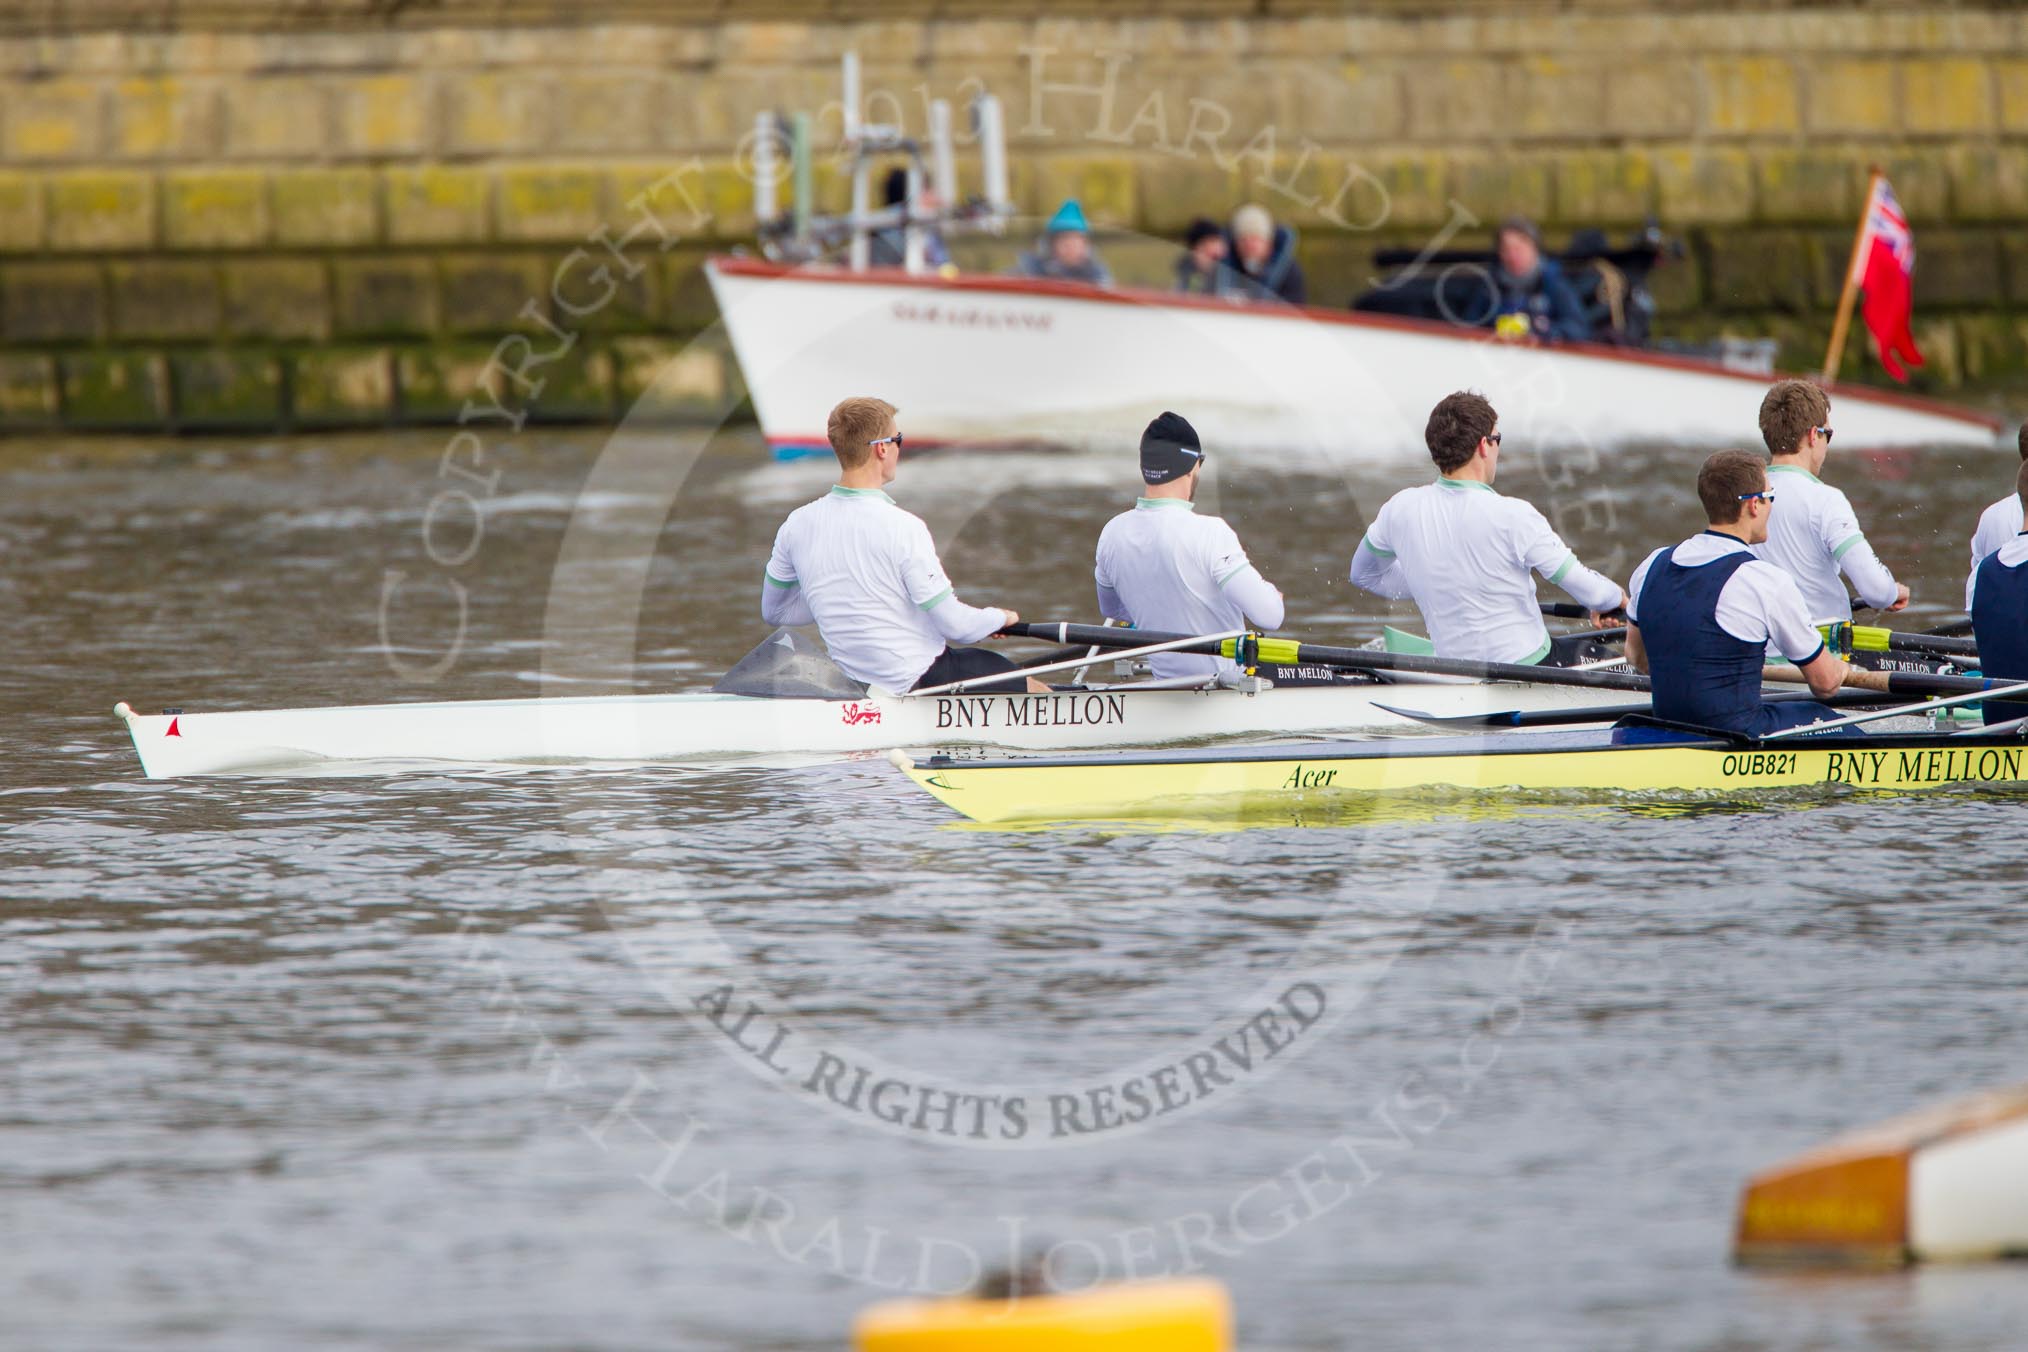 The Boat Race 2013.
Putney,
London SW15,

United Kingdom,
on 31 March 2013 at 16:31, image #272